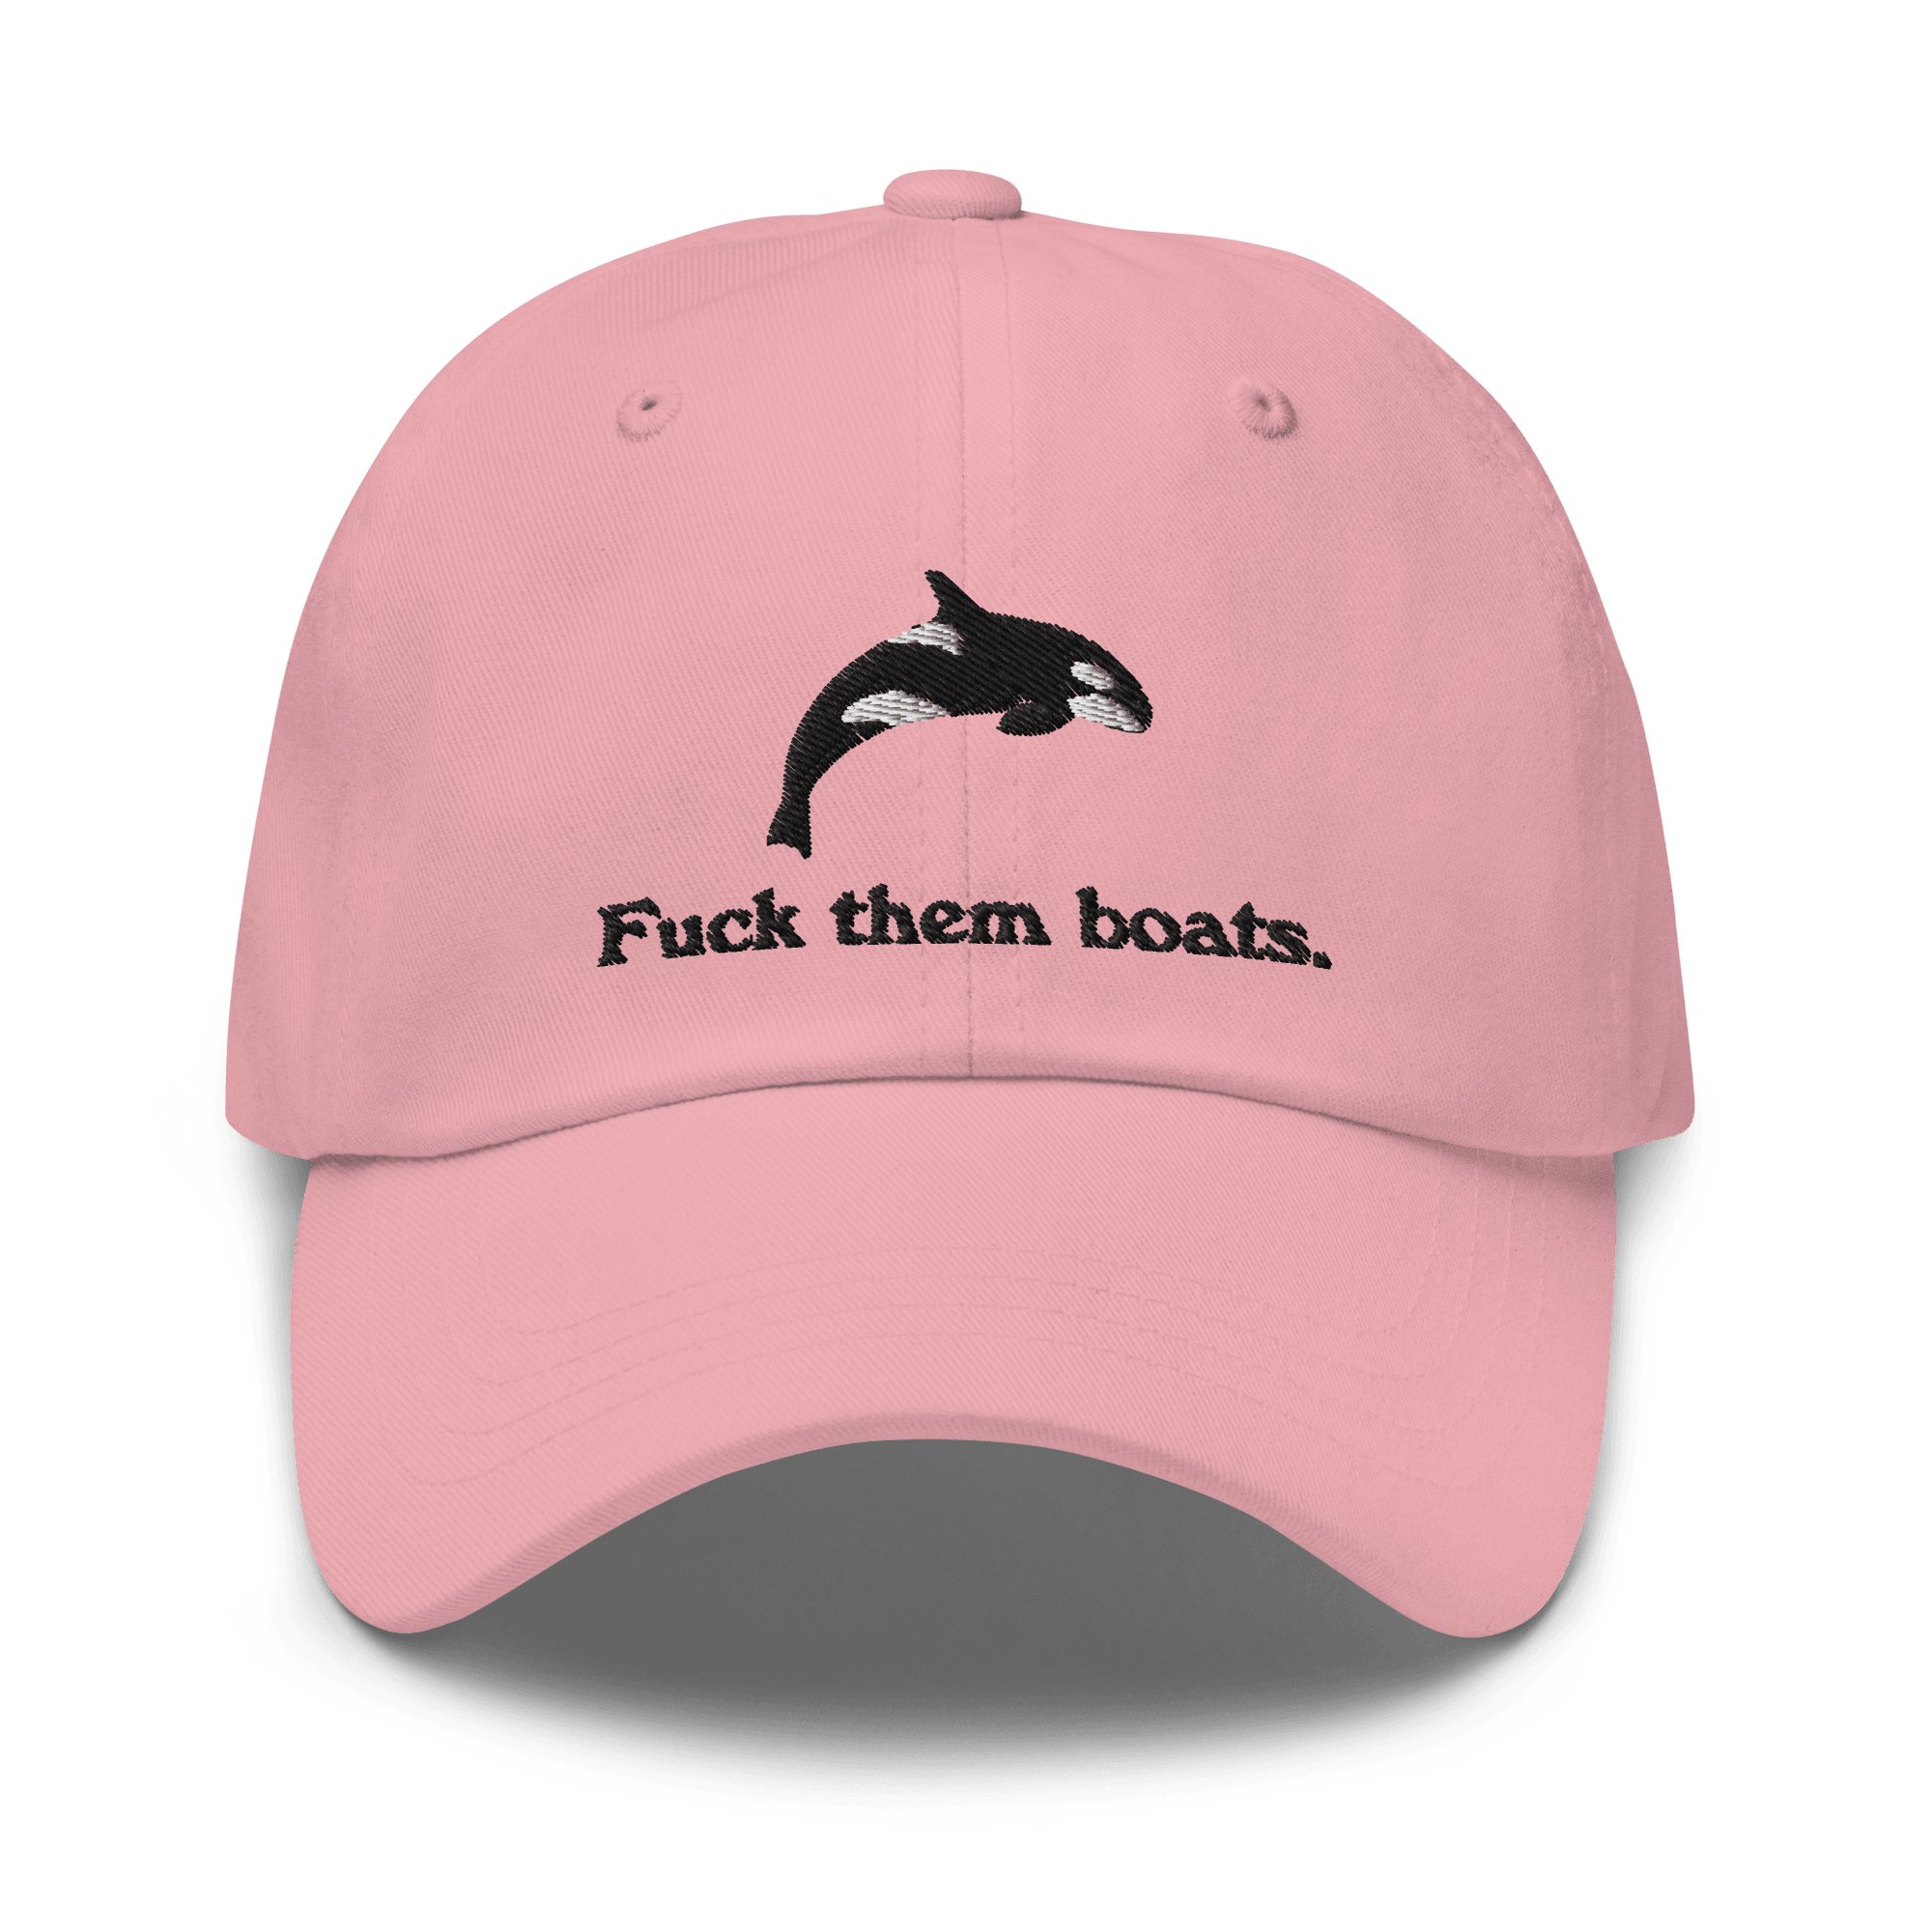 Fuck Them Boats - The Original Embroidered Orca Whale Hat - Polychrome Goods 🍊